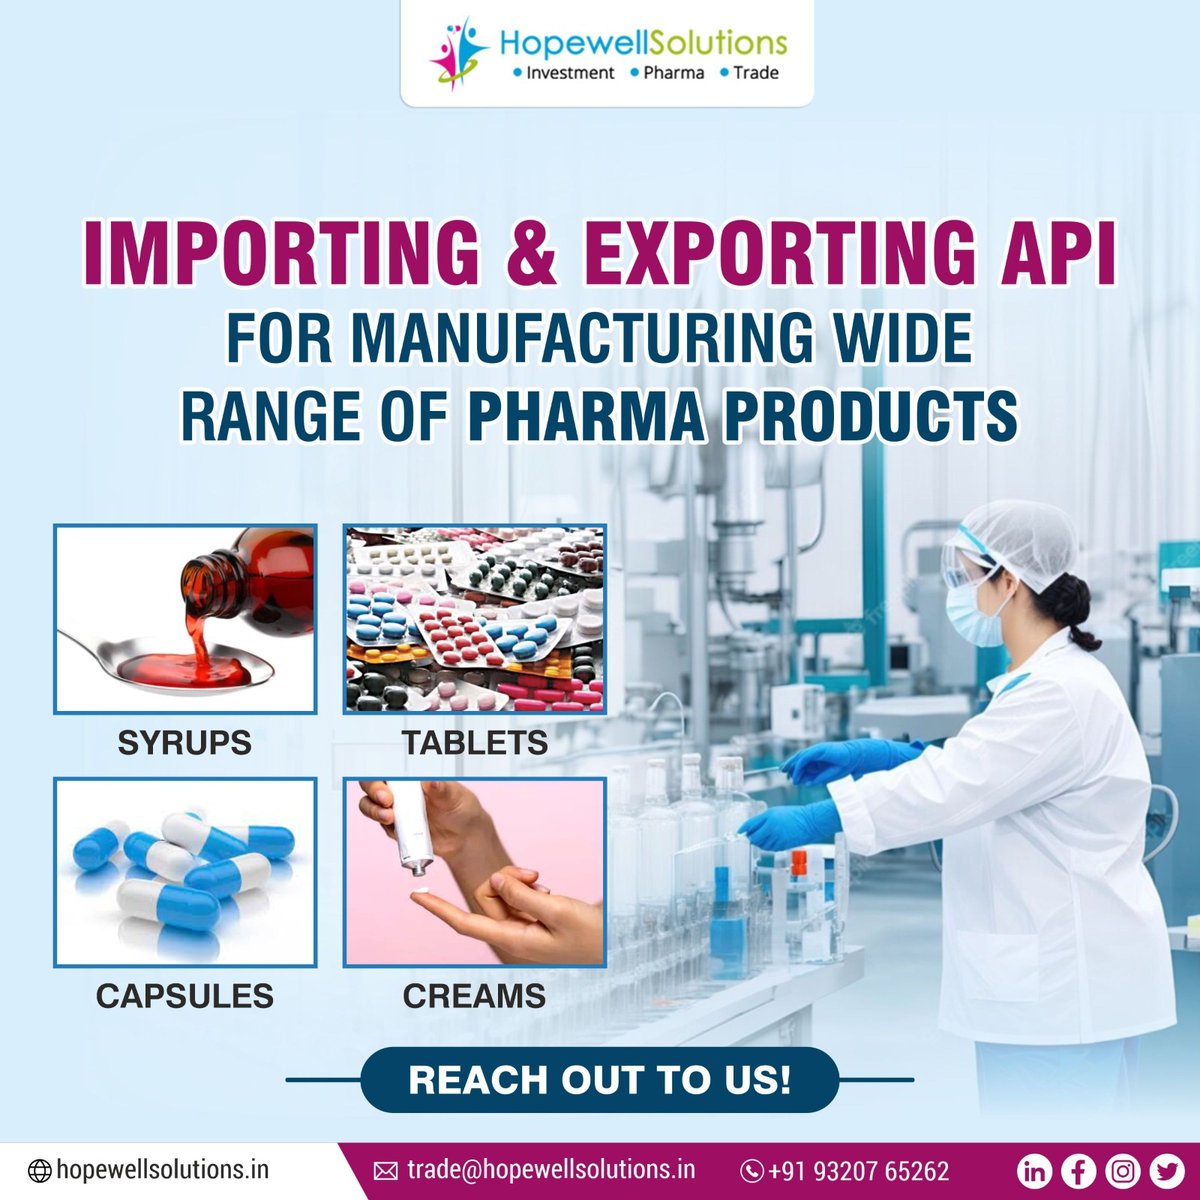 💊 Welcome to the future of API trading, where every ingredient is a step toward a healthier world. 🌍

#hopewellsolutions #trade #trading #api #apitrading #pharma #pharmaceuticals #demandmanagement #productprocurement #strategicsourcing #affordable #bestprices #apidelivery